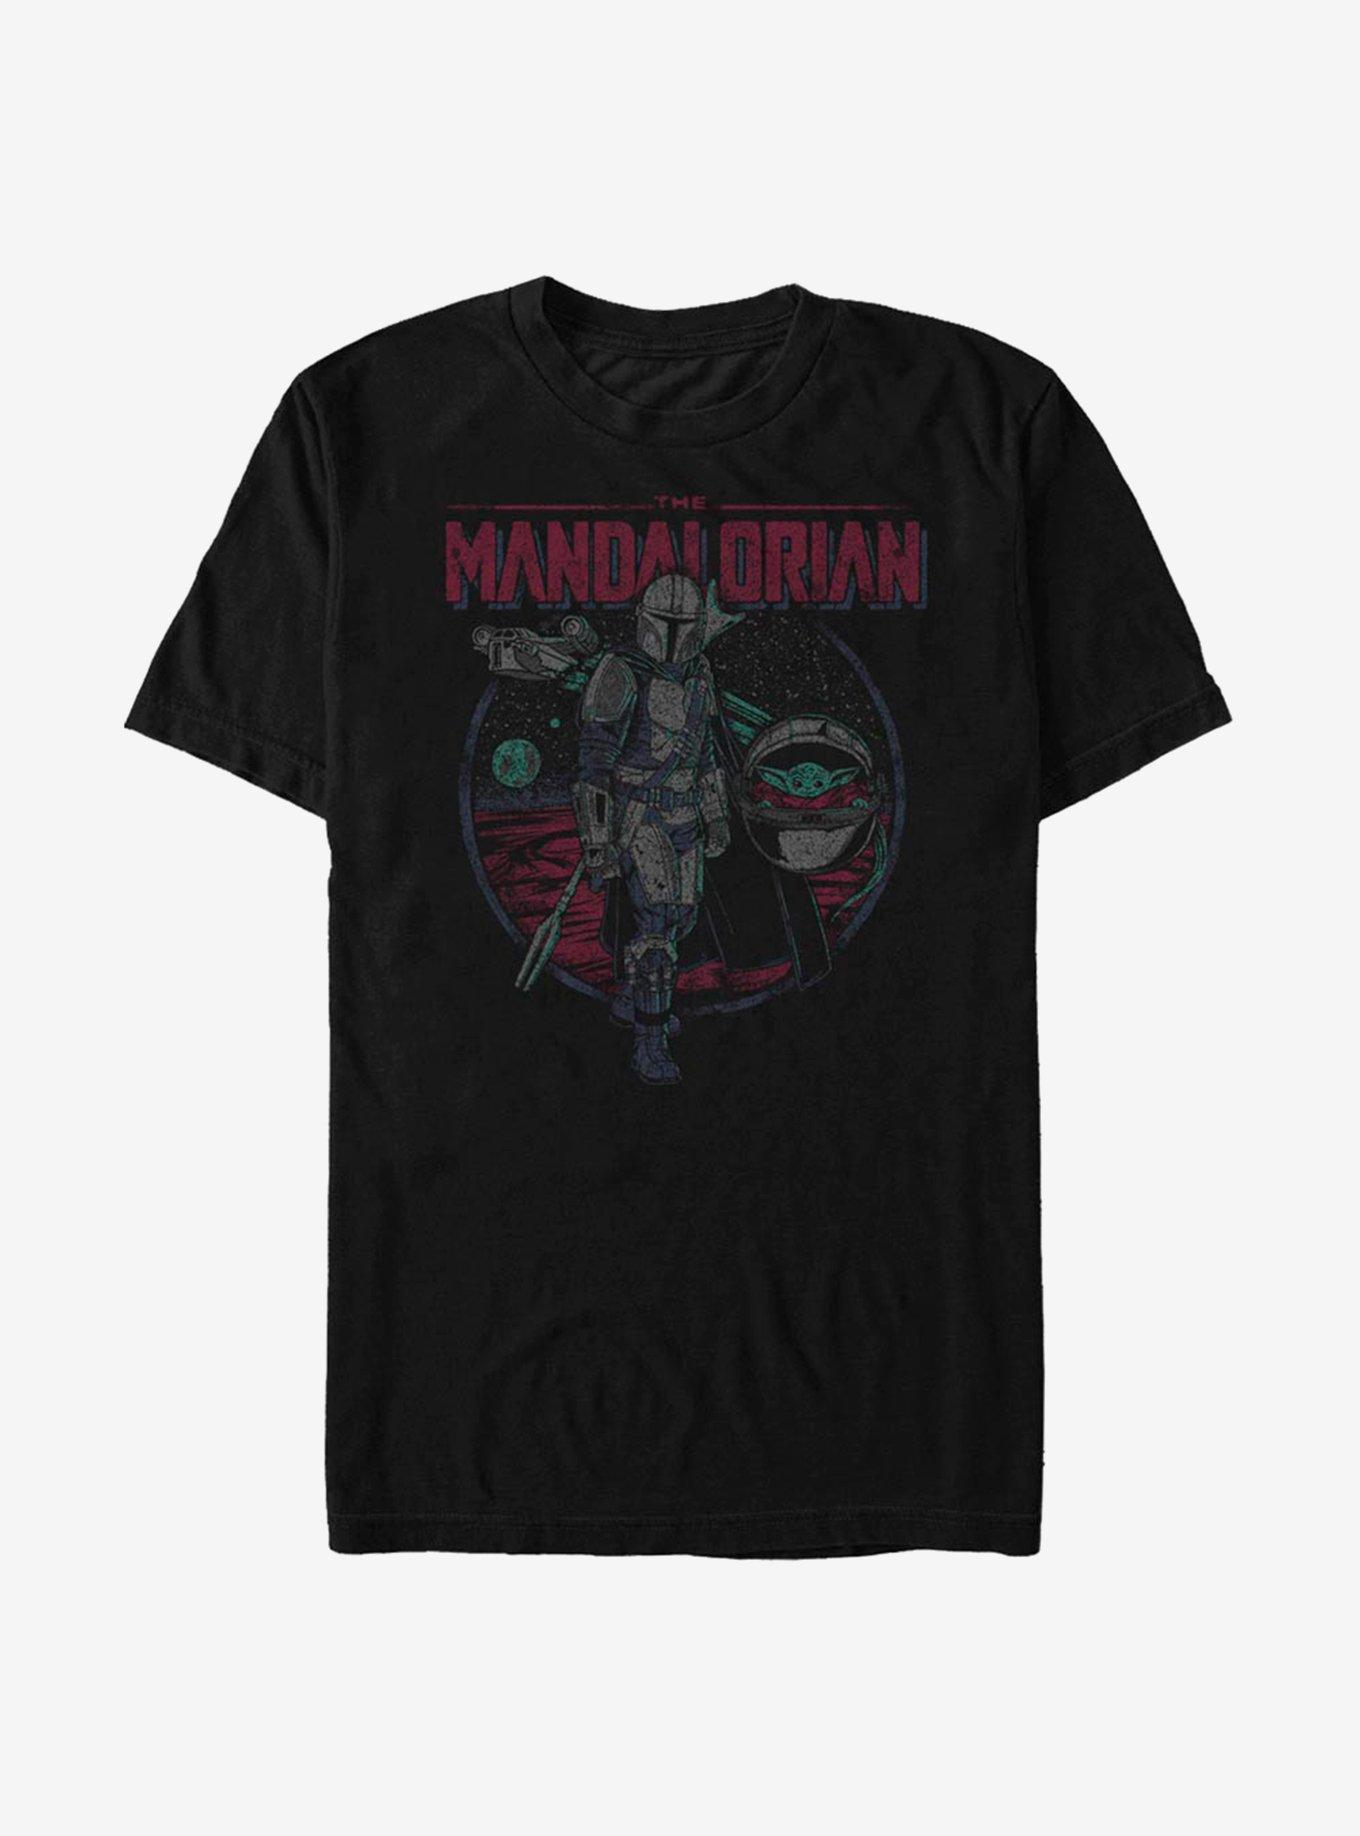 Star Wars The Mandalorian The Child Adorable Space Muppet T-Shirt, BLACK, hi-res